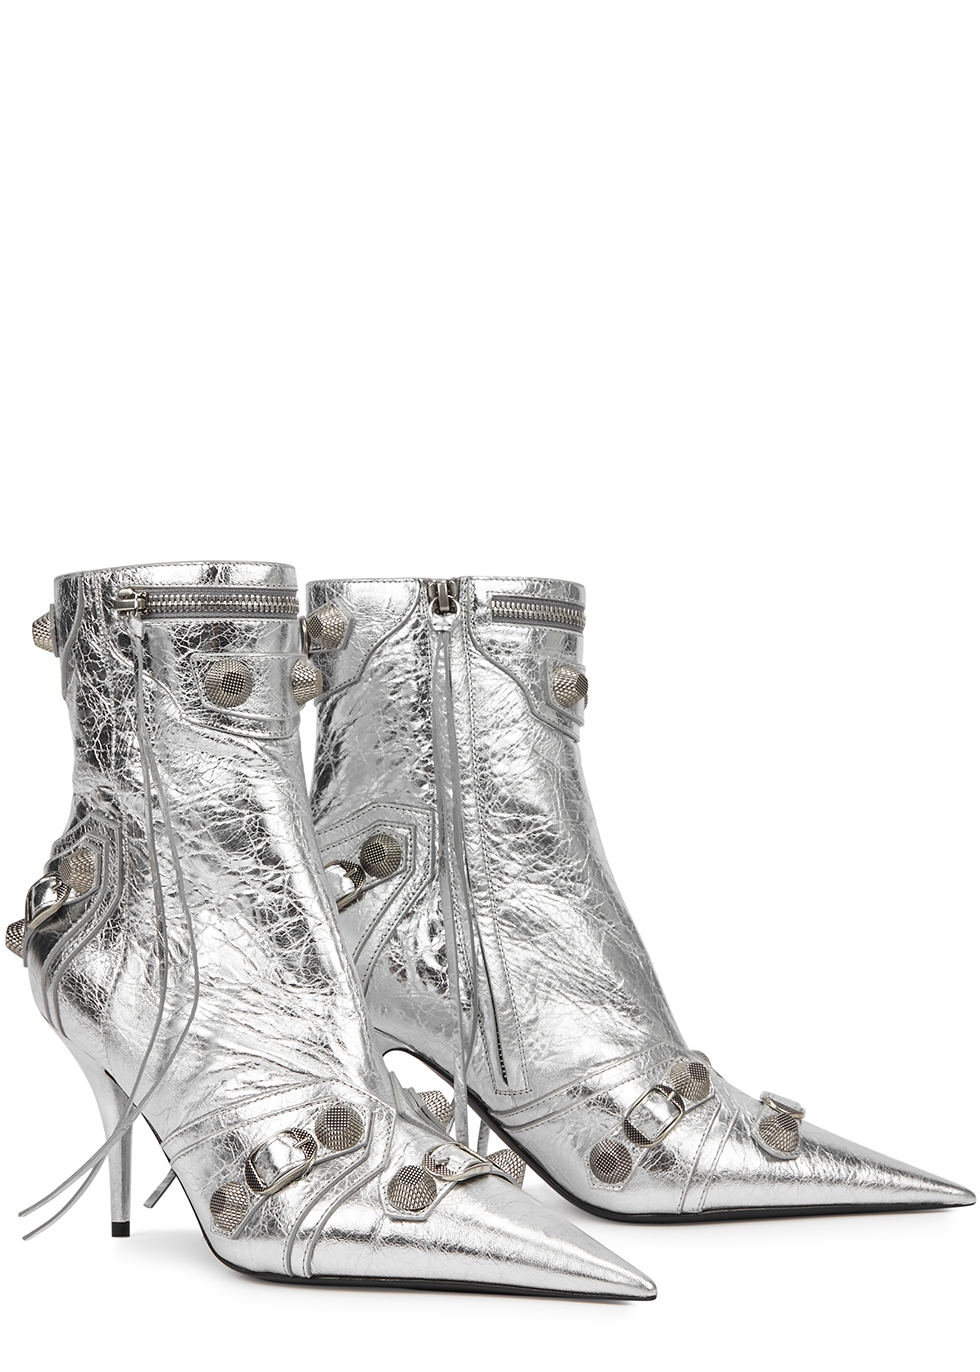 Balenciaga Mirrored Metallic Ankle Bootie Size 38 silver boots for sale  online  eBay